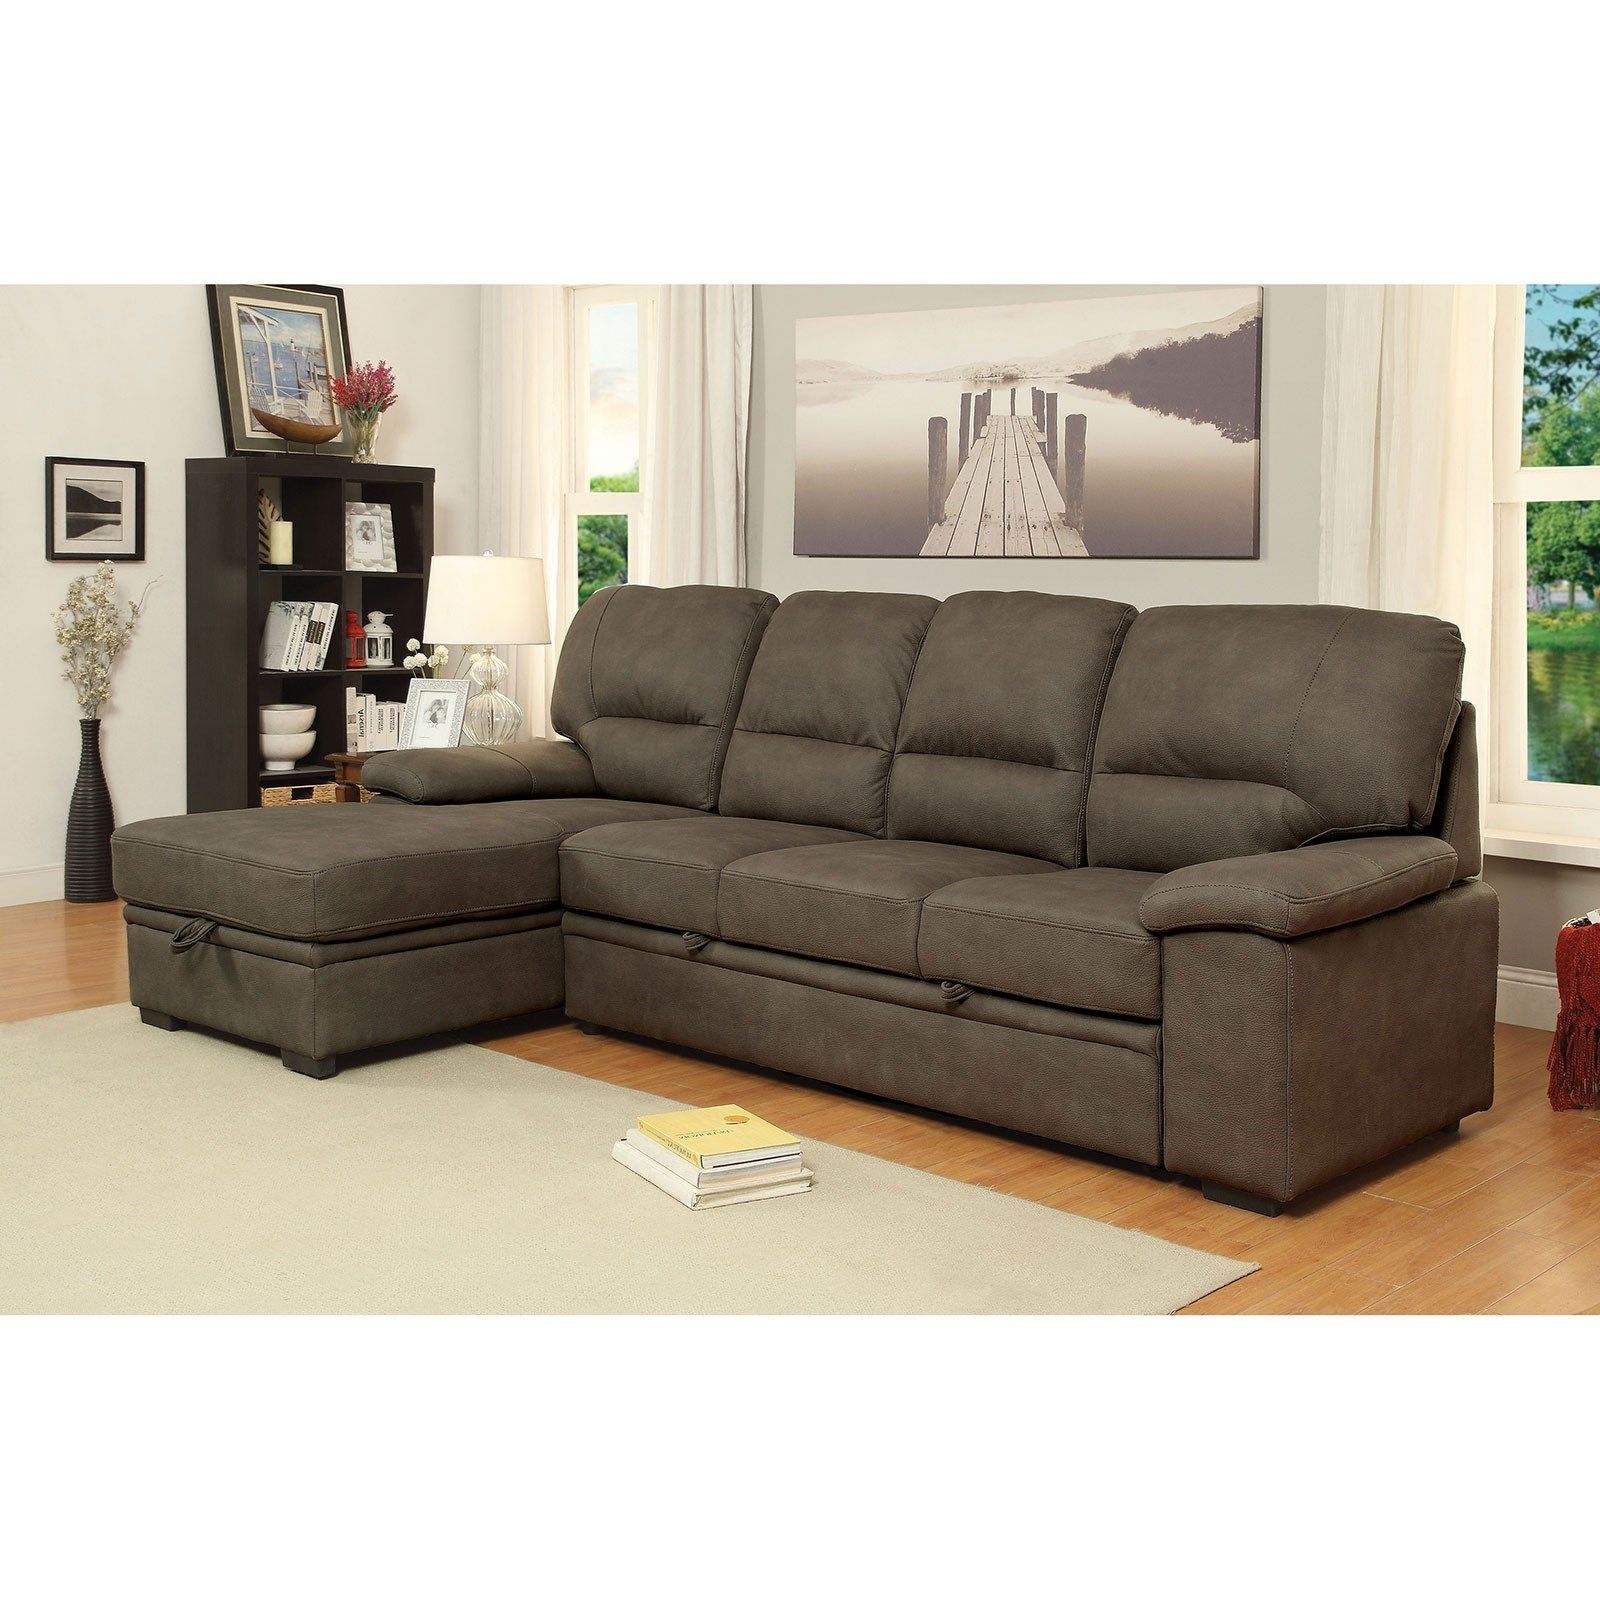 Furniture Of America Alcester 4 Seat Sectional Sofa With Sleeper And With Left Or Right Facing Sleeper Sectionals (View 17 of 20)